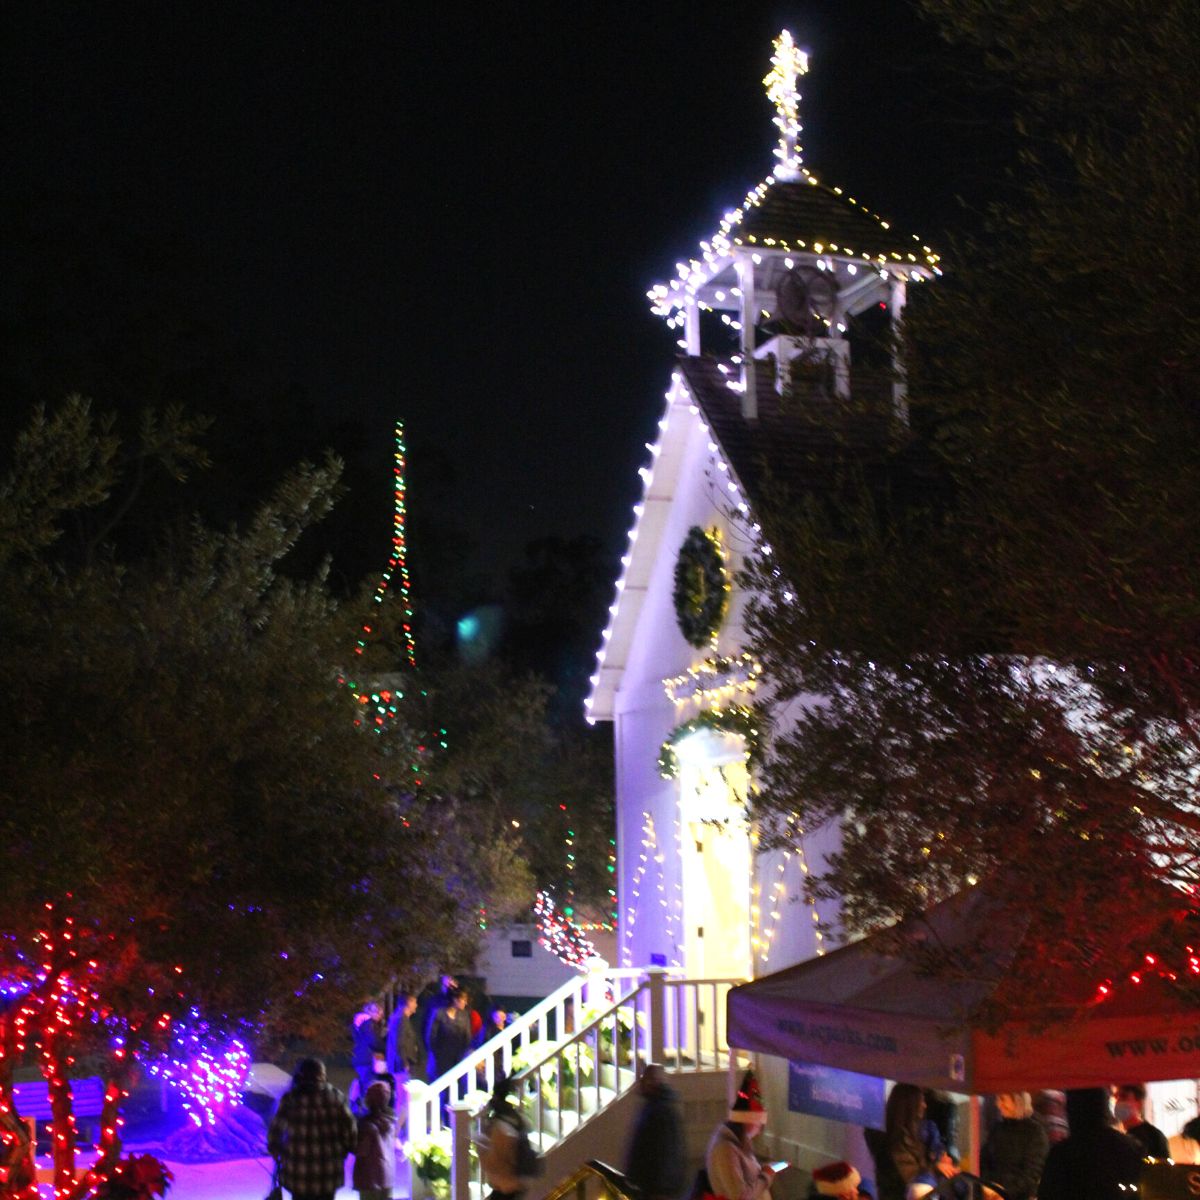 Heritage Hill Candlelight Walk & Holiday Lights